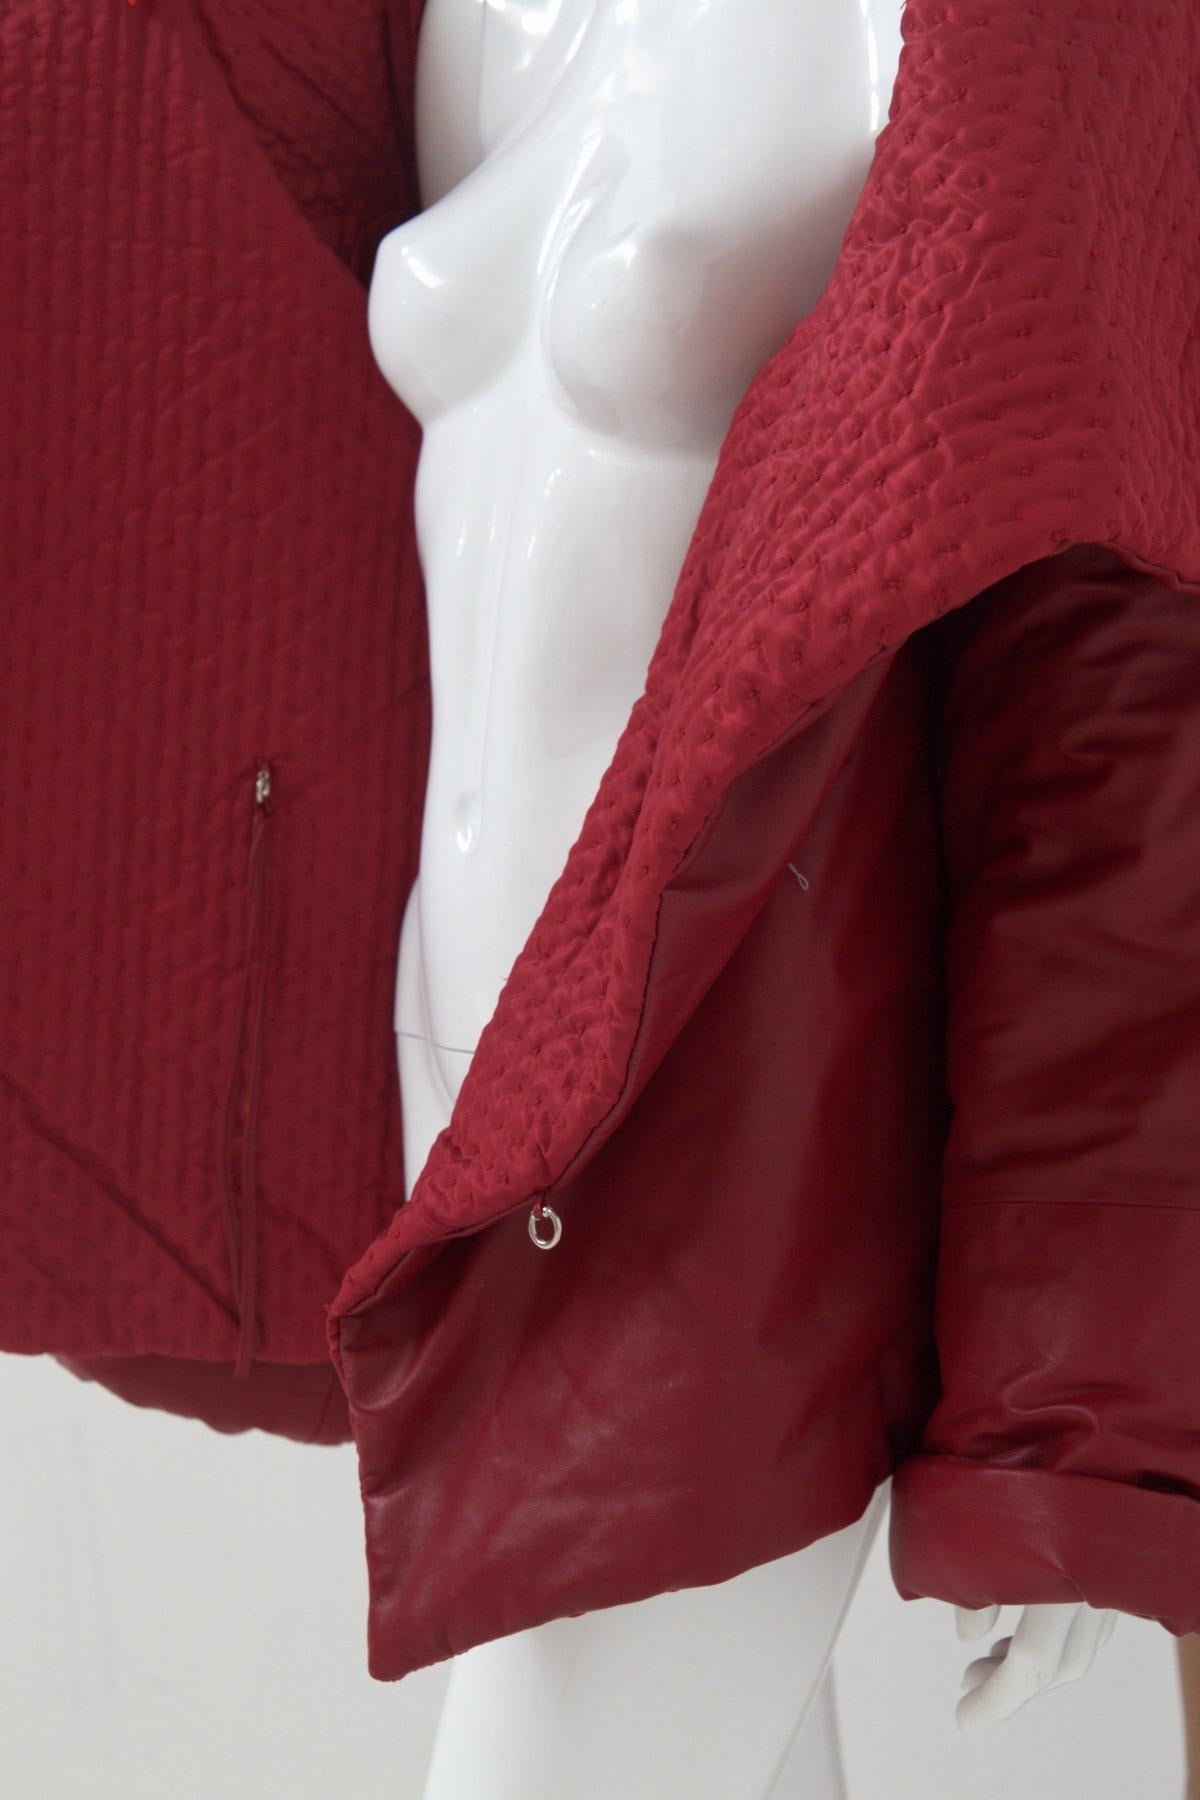 Gianfranco Ferré Rare Oversized Red Leather Jacket For Sale 11